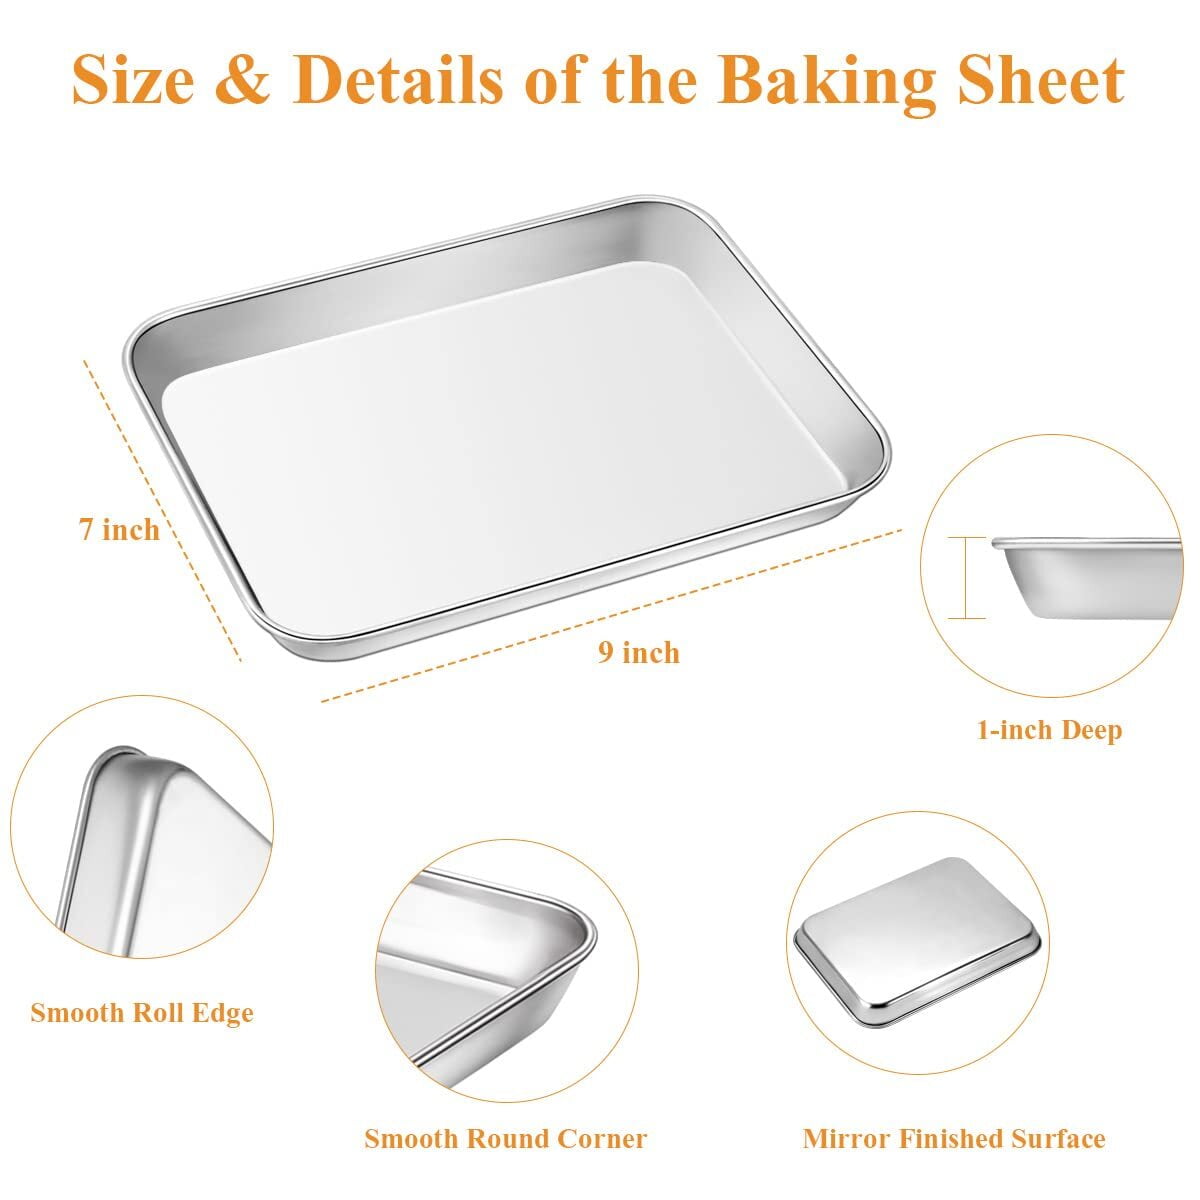 Baking Sheet, Zacfton Cookie Sheet Stainless Steel Toaster Oven Tray Pan Rectangle Size 12 x 10 x 1 inch, Non Toxic & Healthy,Superior Mirror Finish 